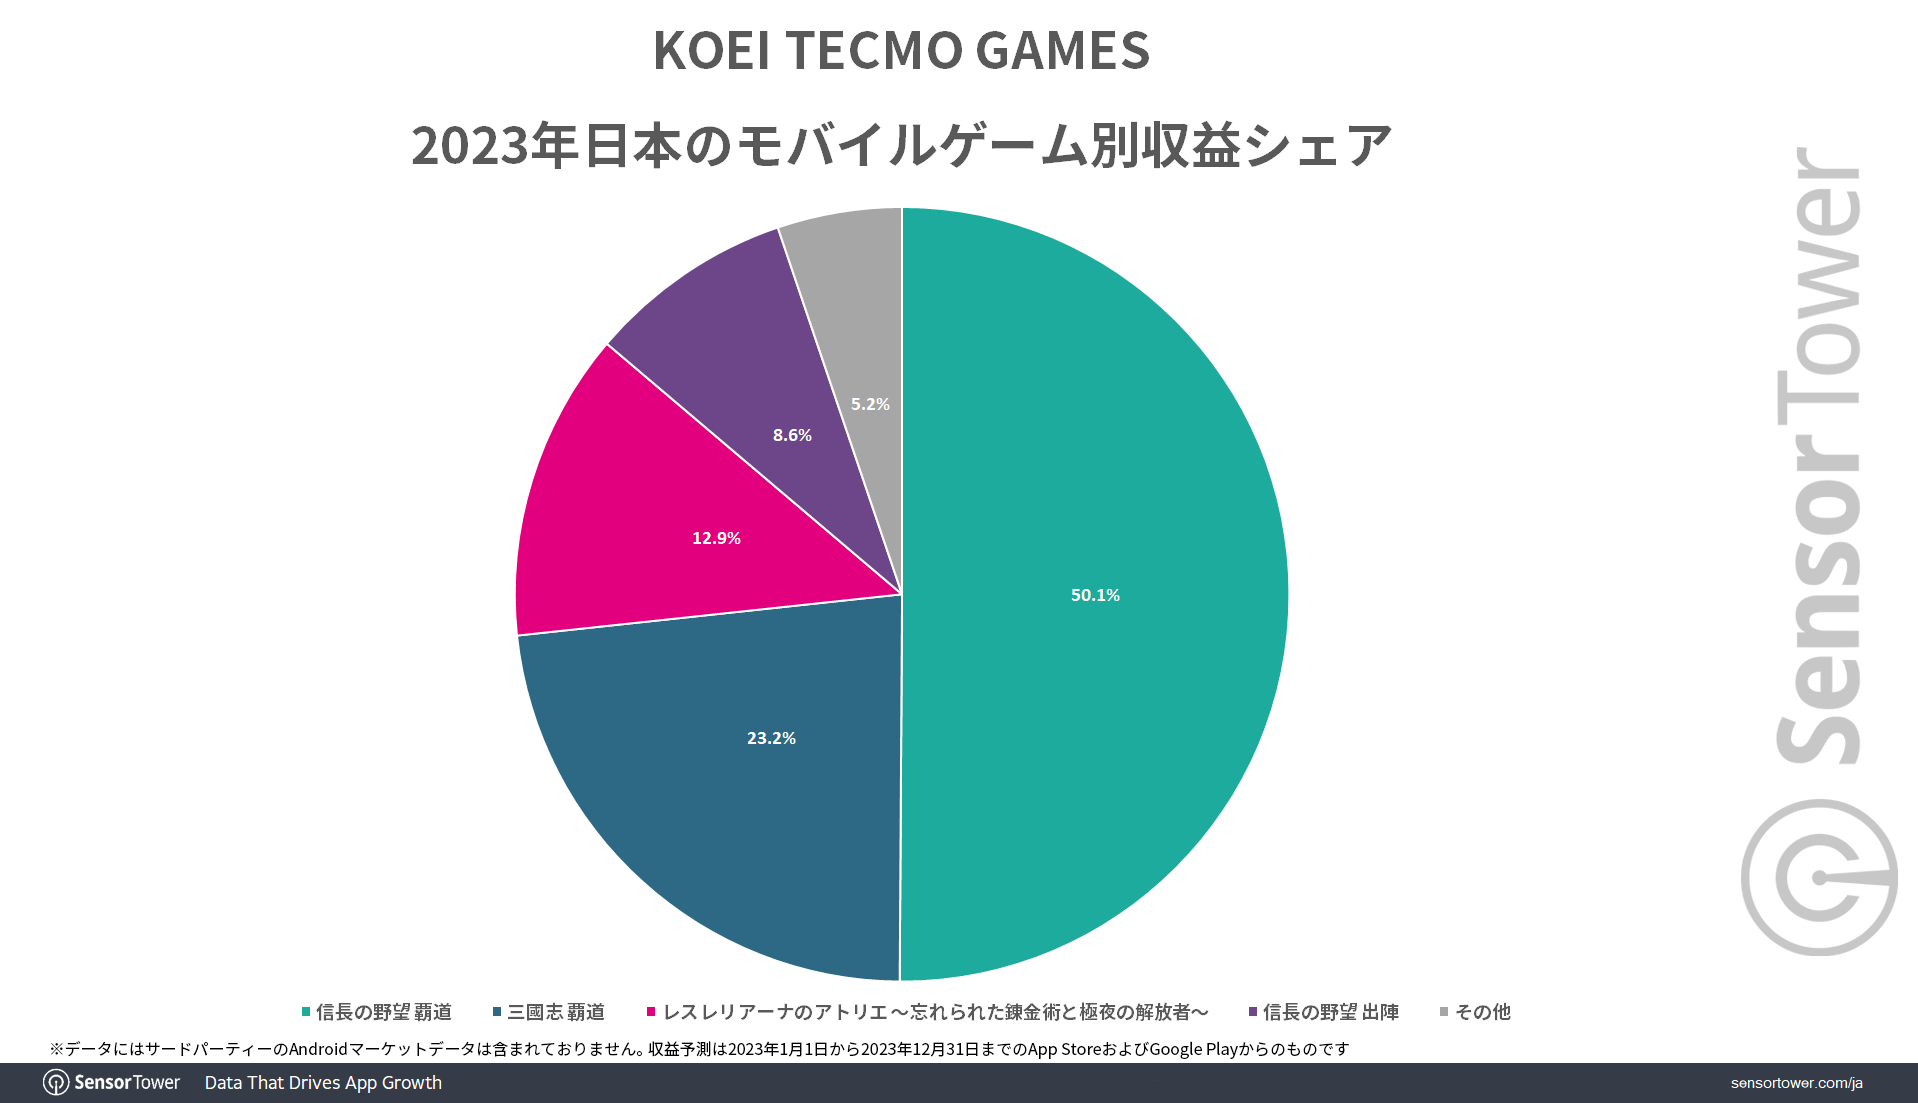 Revenue-Share-by-Game-KOEI